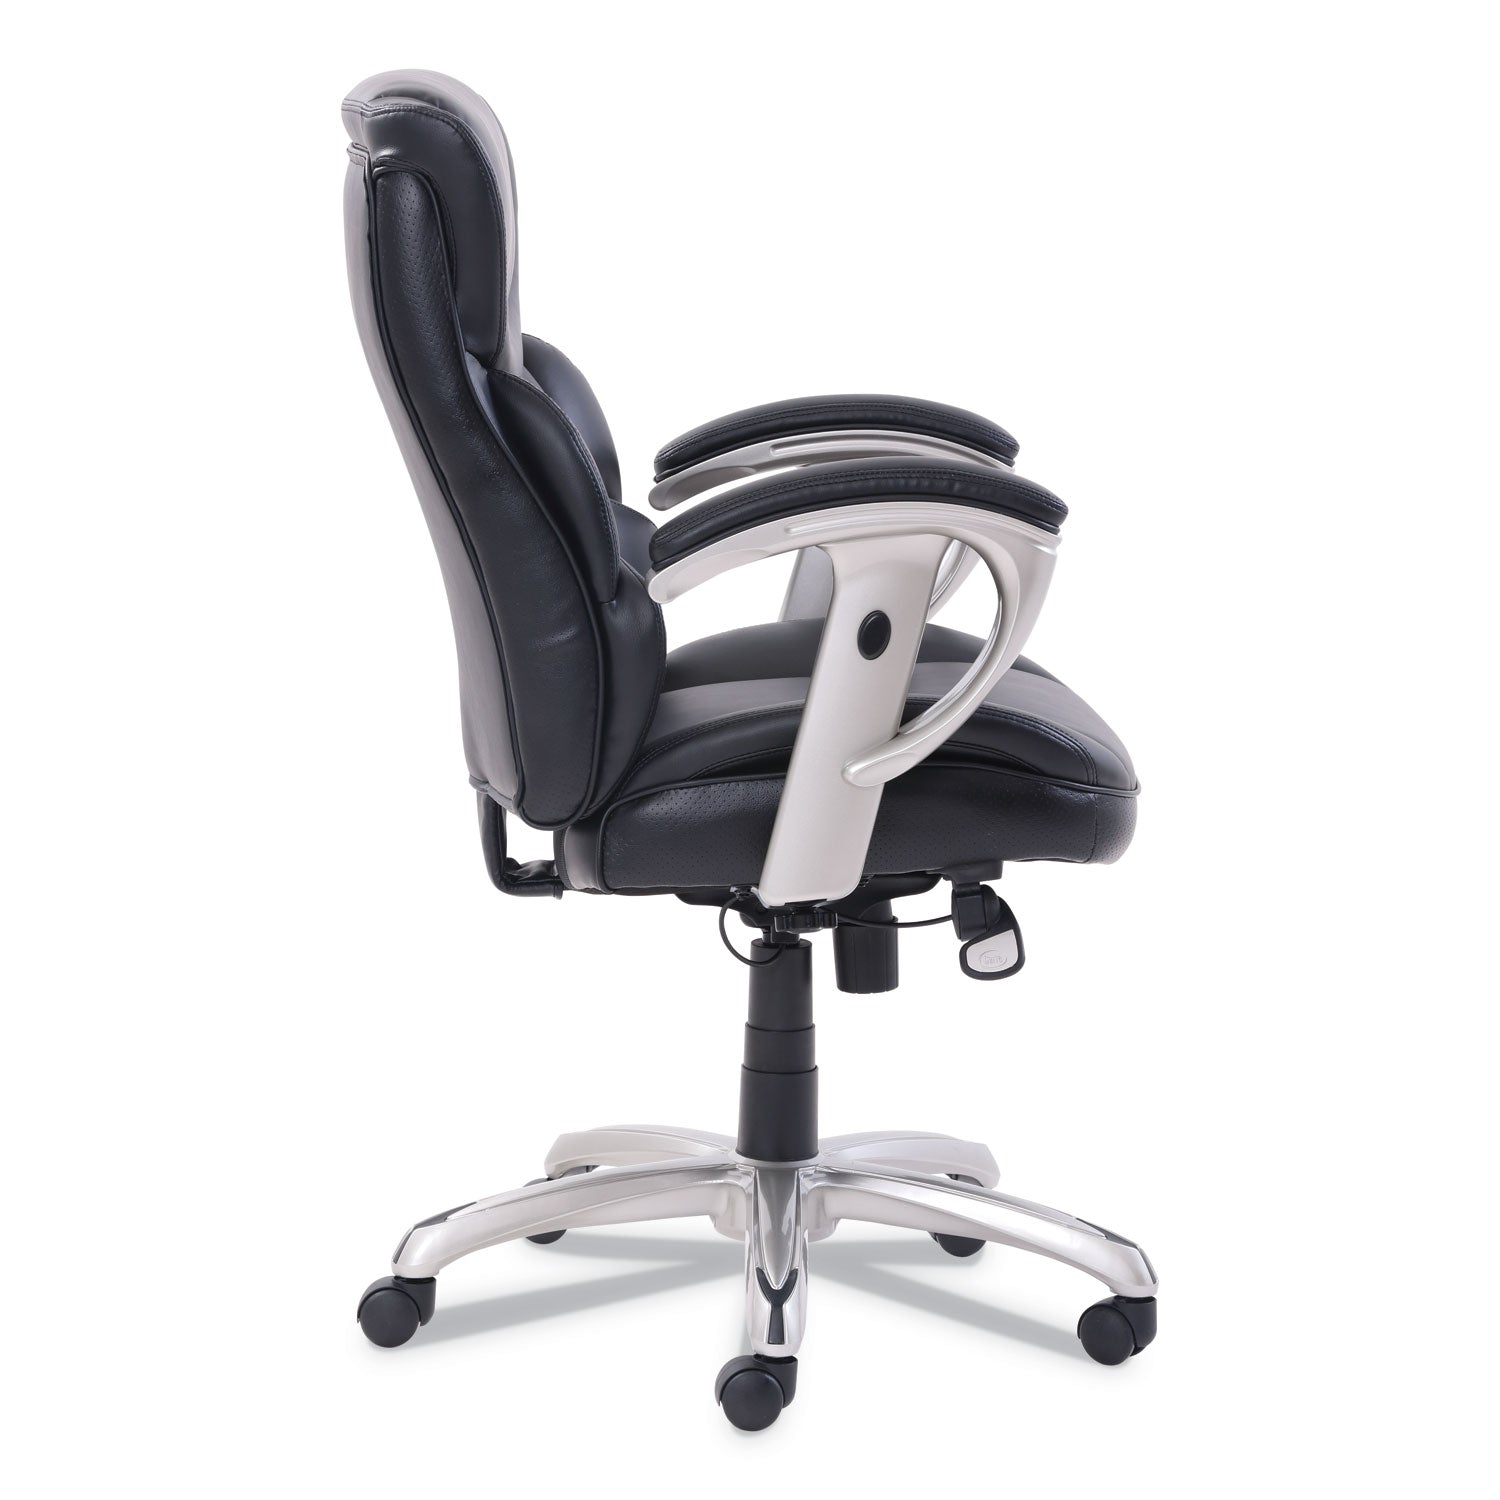 emerson-task-chair-supports-up-to-300-lb-1875-to-2175-seat-height-black-seat-back-silver-base_srj49711blk - 3